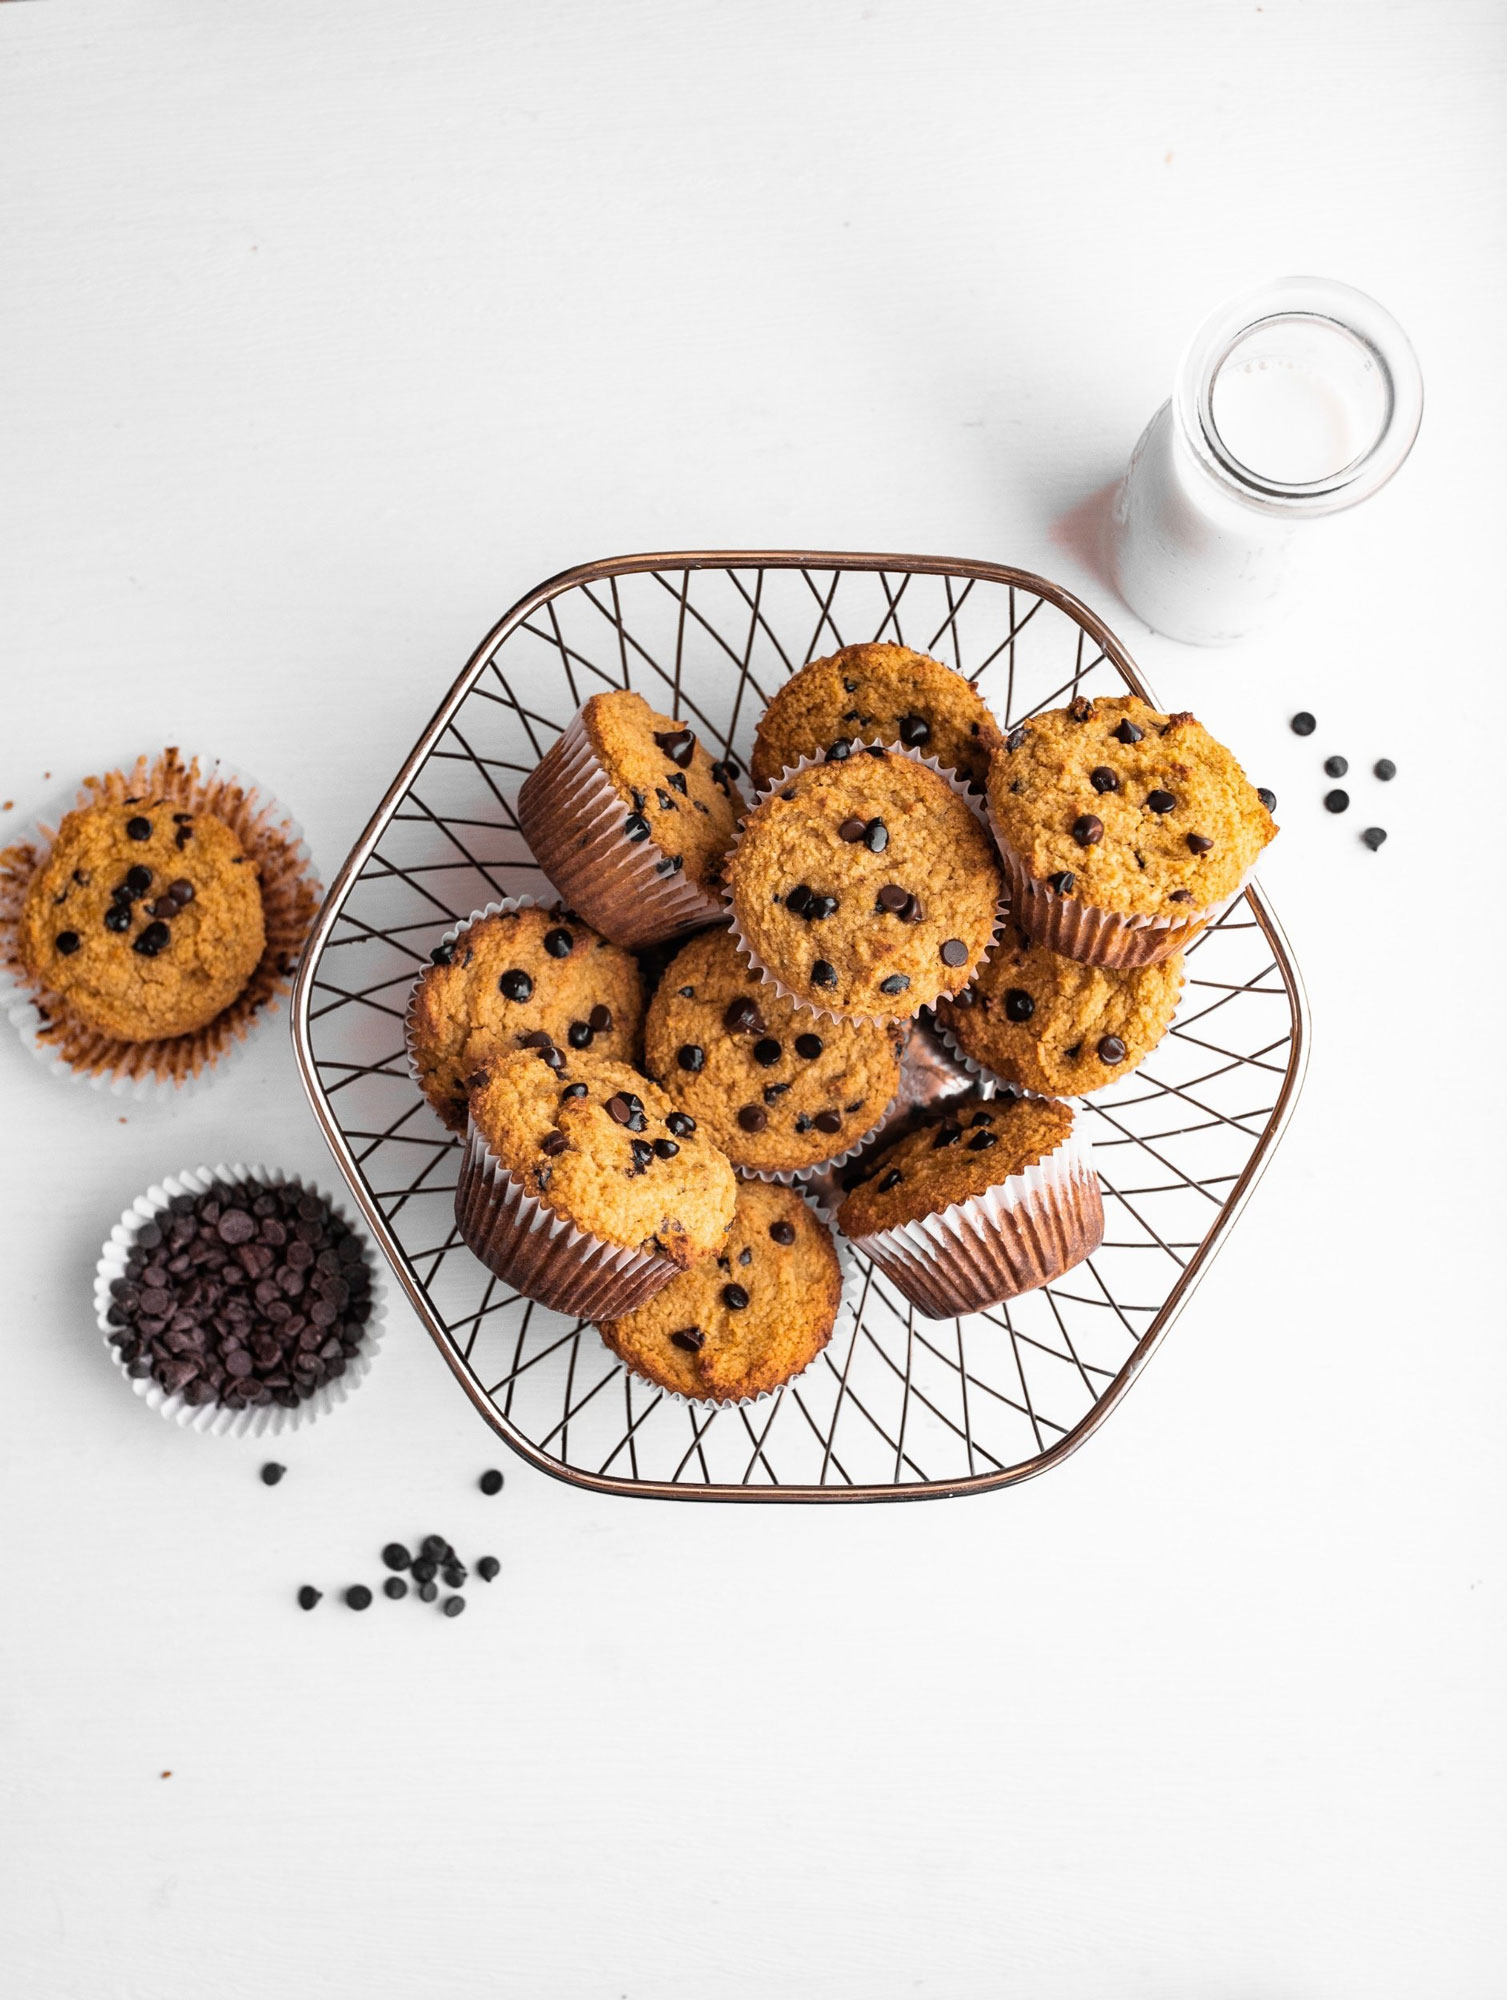 Grain-free chocolate chip muffins from Stelle & Co Bakes